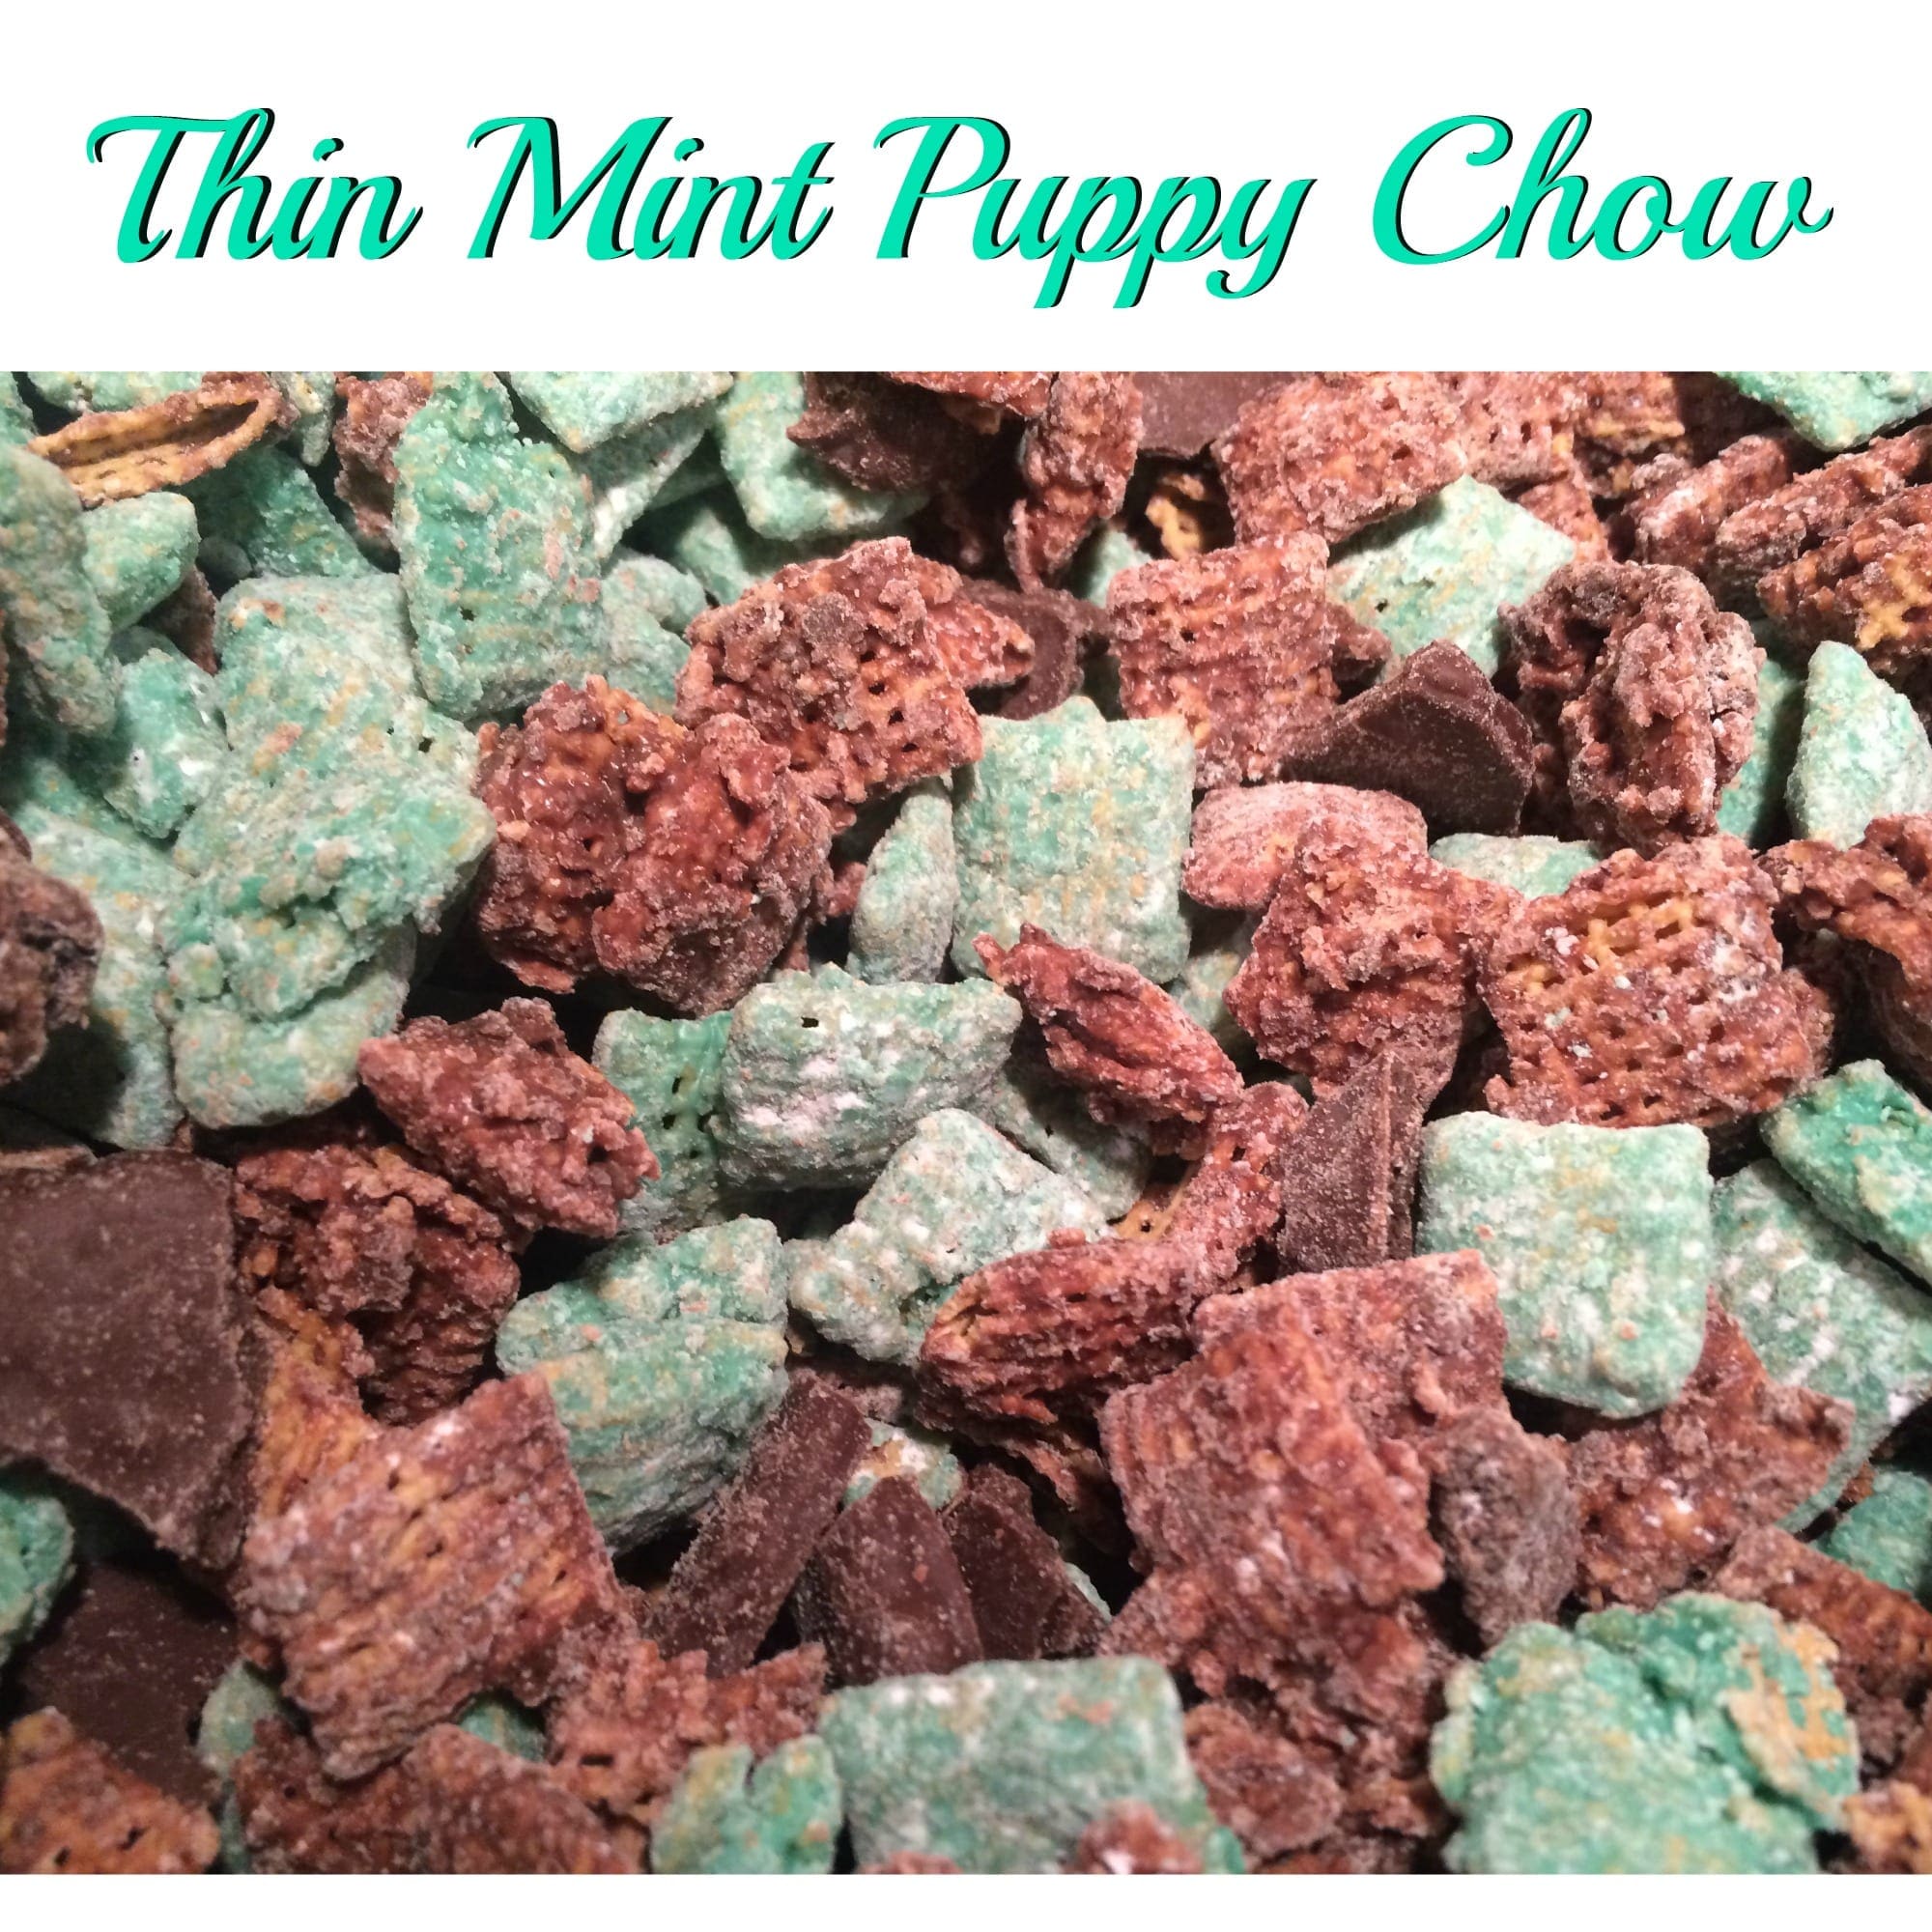 Thin Mint Puppy Chow